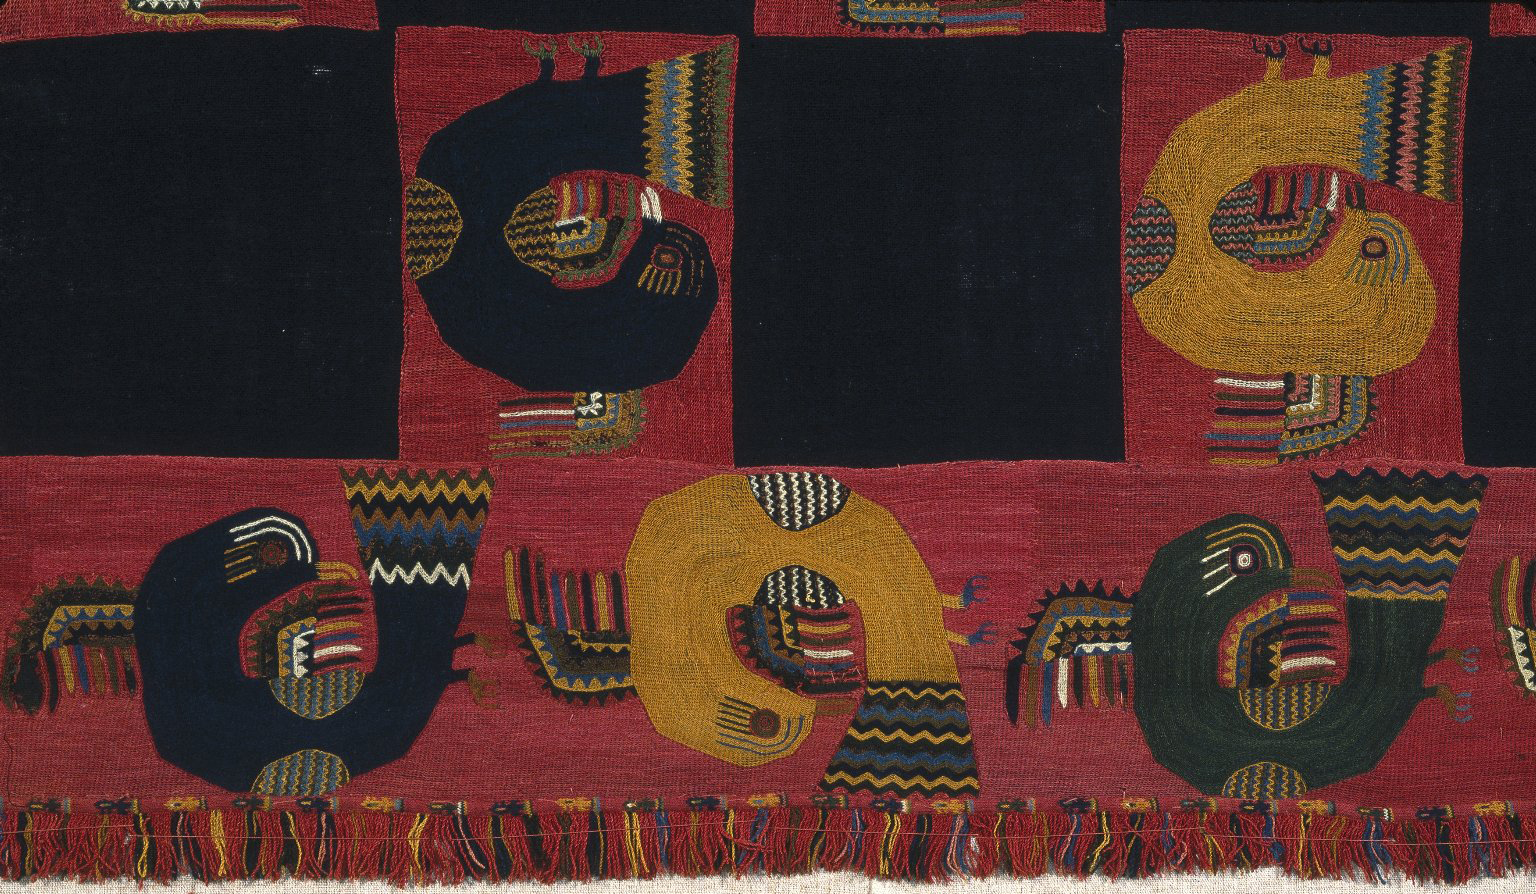 Paracas, detail of Block Color style embroidered mantle with falcons, c. 100 C.E., cotton, camelid fiber, 117 11/16 x 53 15/16 in. (298.9 x 137 cm) Brooklyn Museum